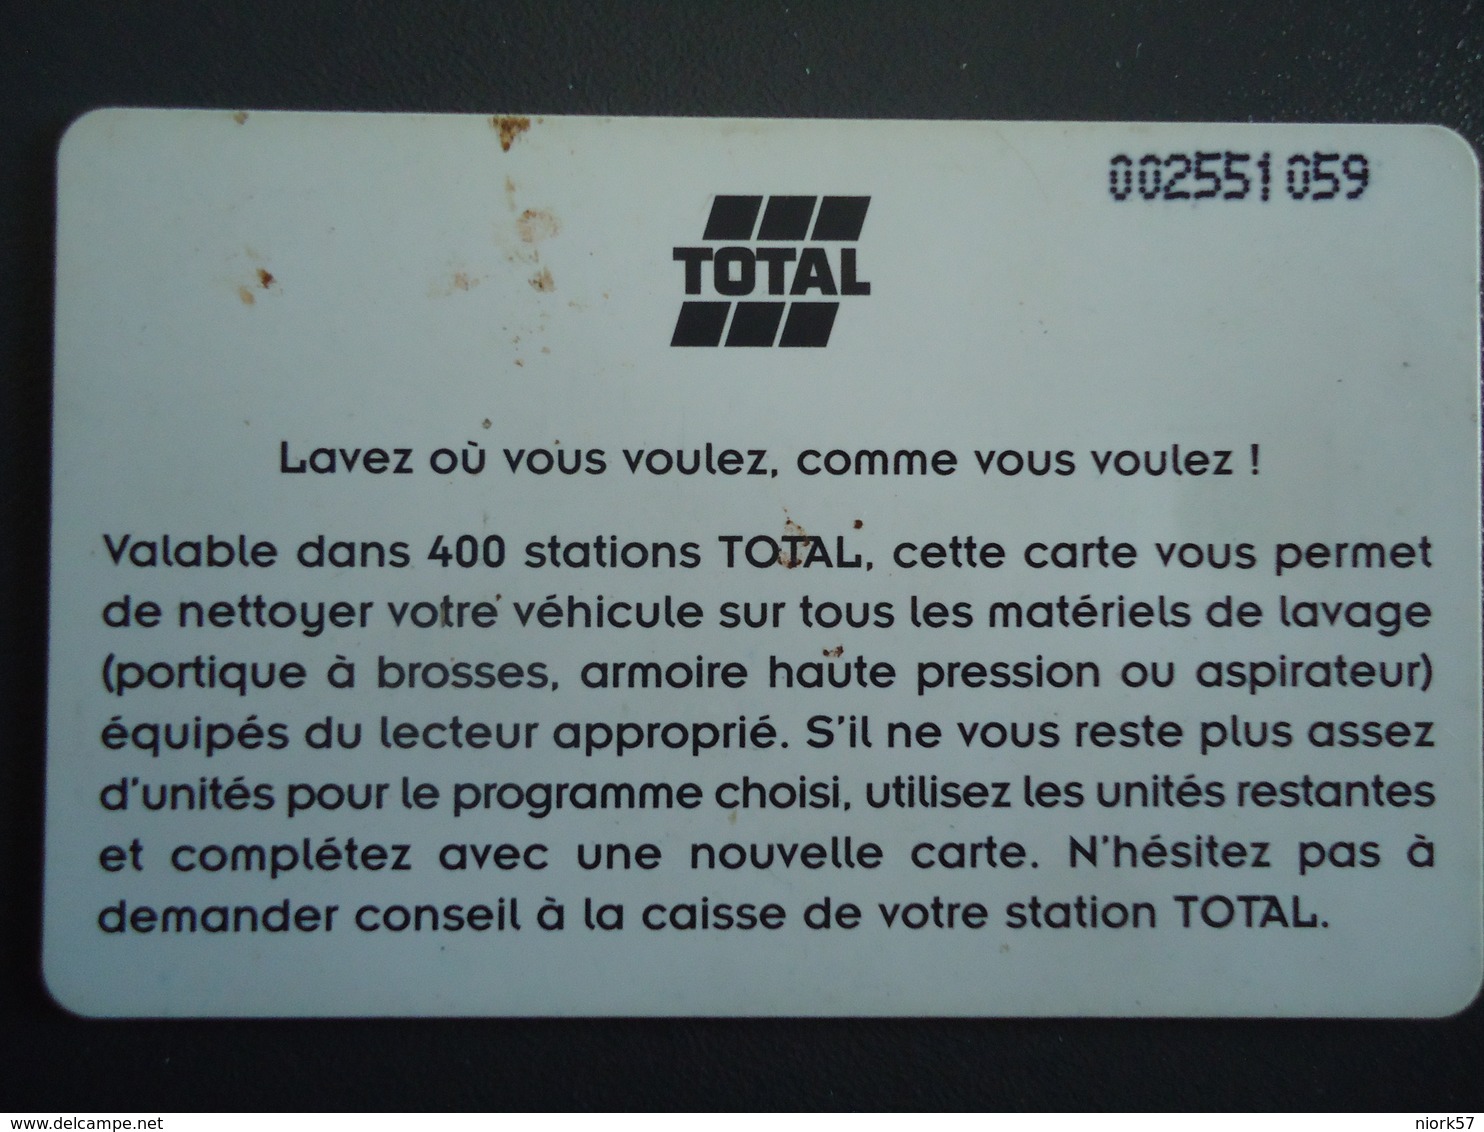 FRANCE  USED CARDS  RARE TOTAL  OIL  CARTE LAVAGE 18 UNITES - Unclassified